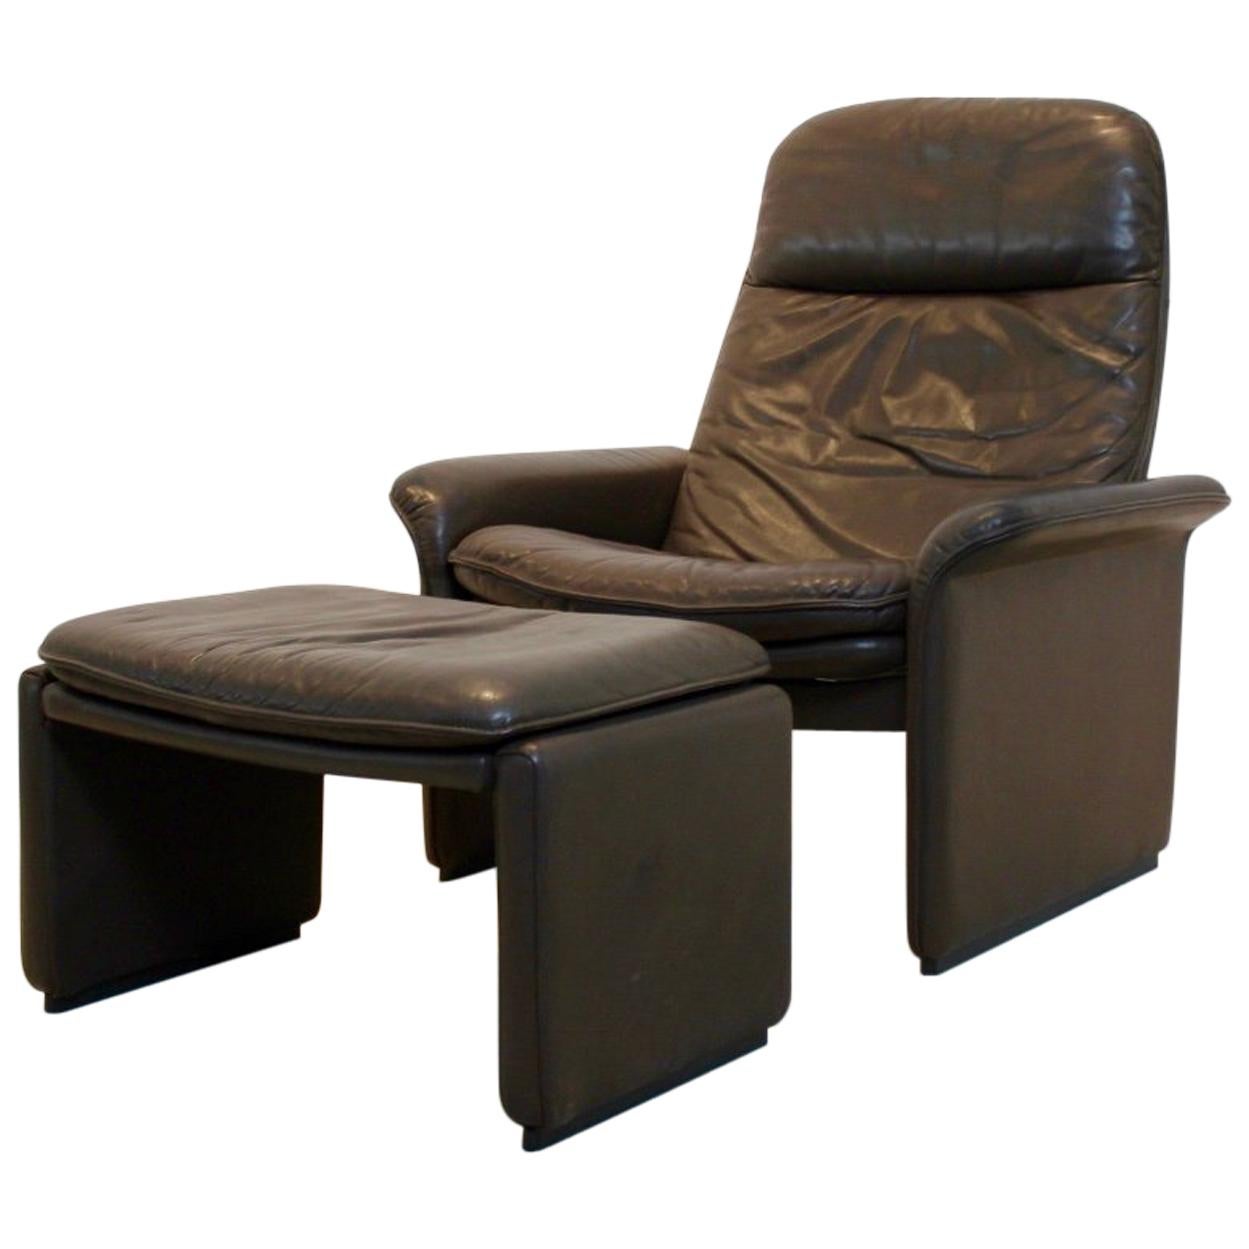 De Sede DS-50 Adjustable Lounge Chair and Ottoman in Soft Thick Chocolate Brown